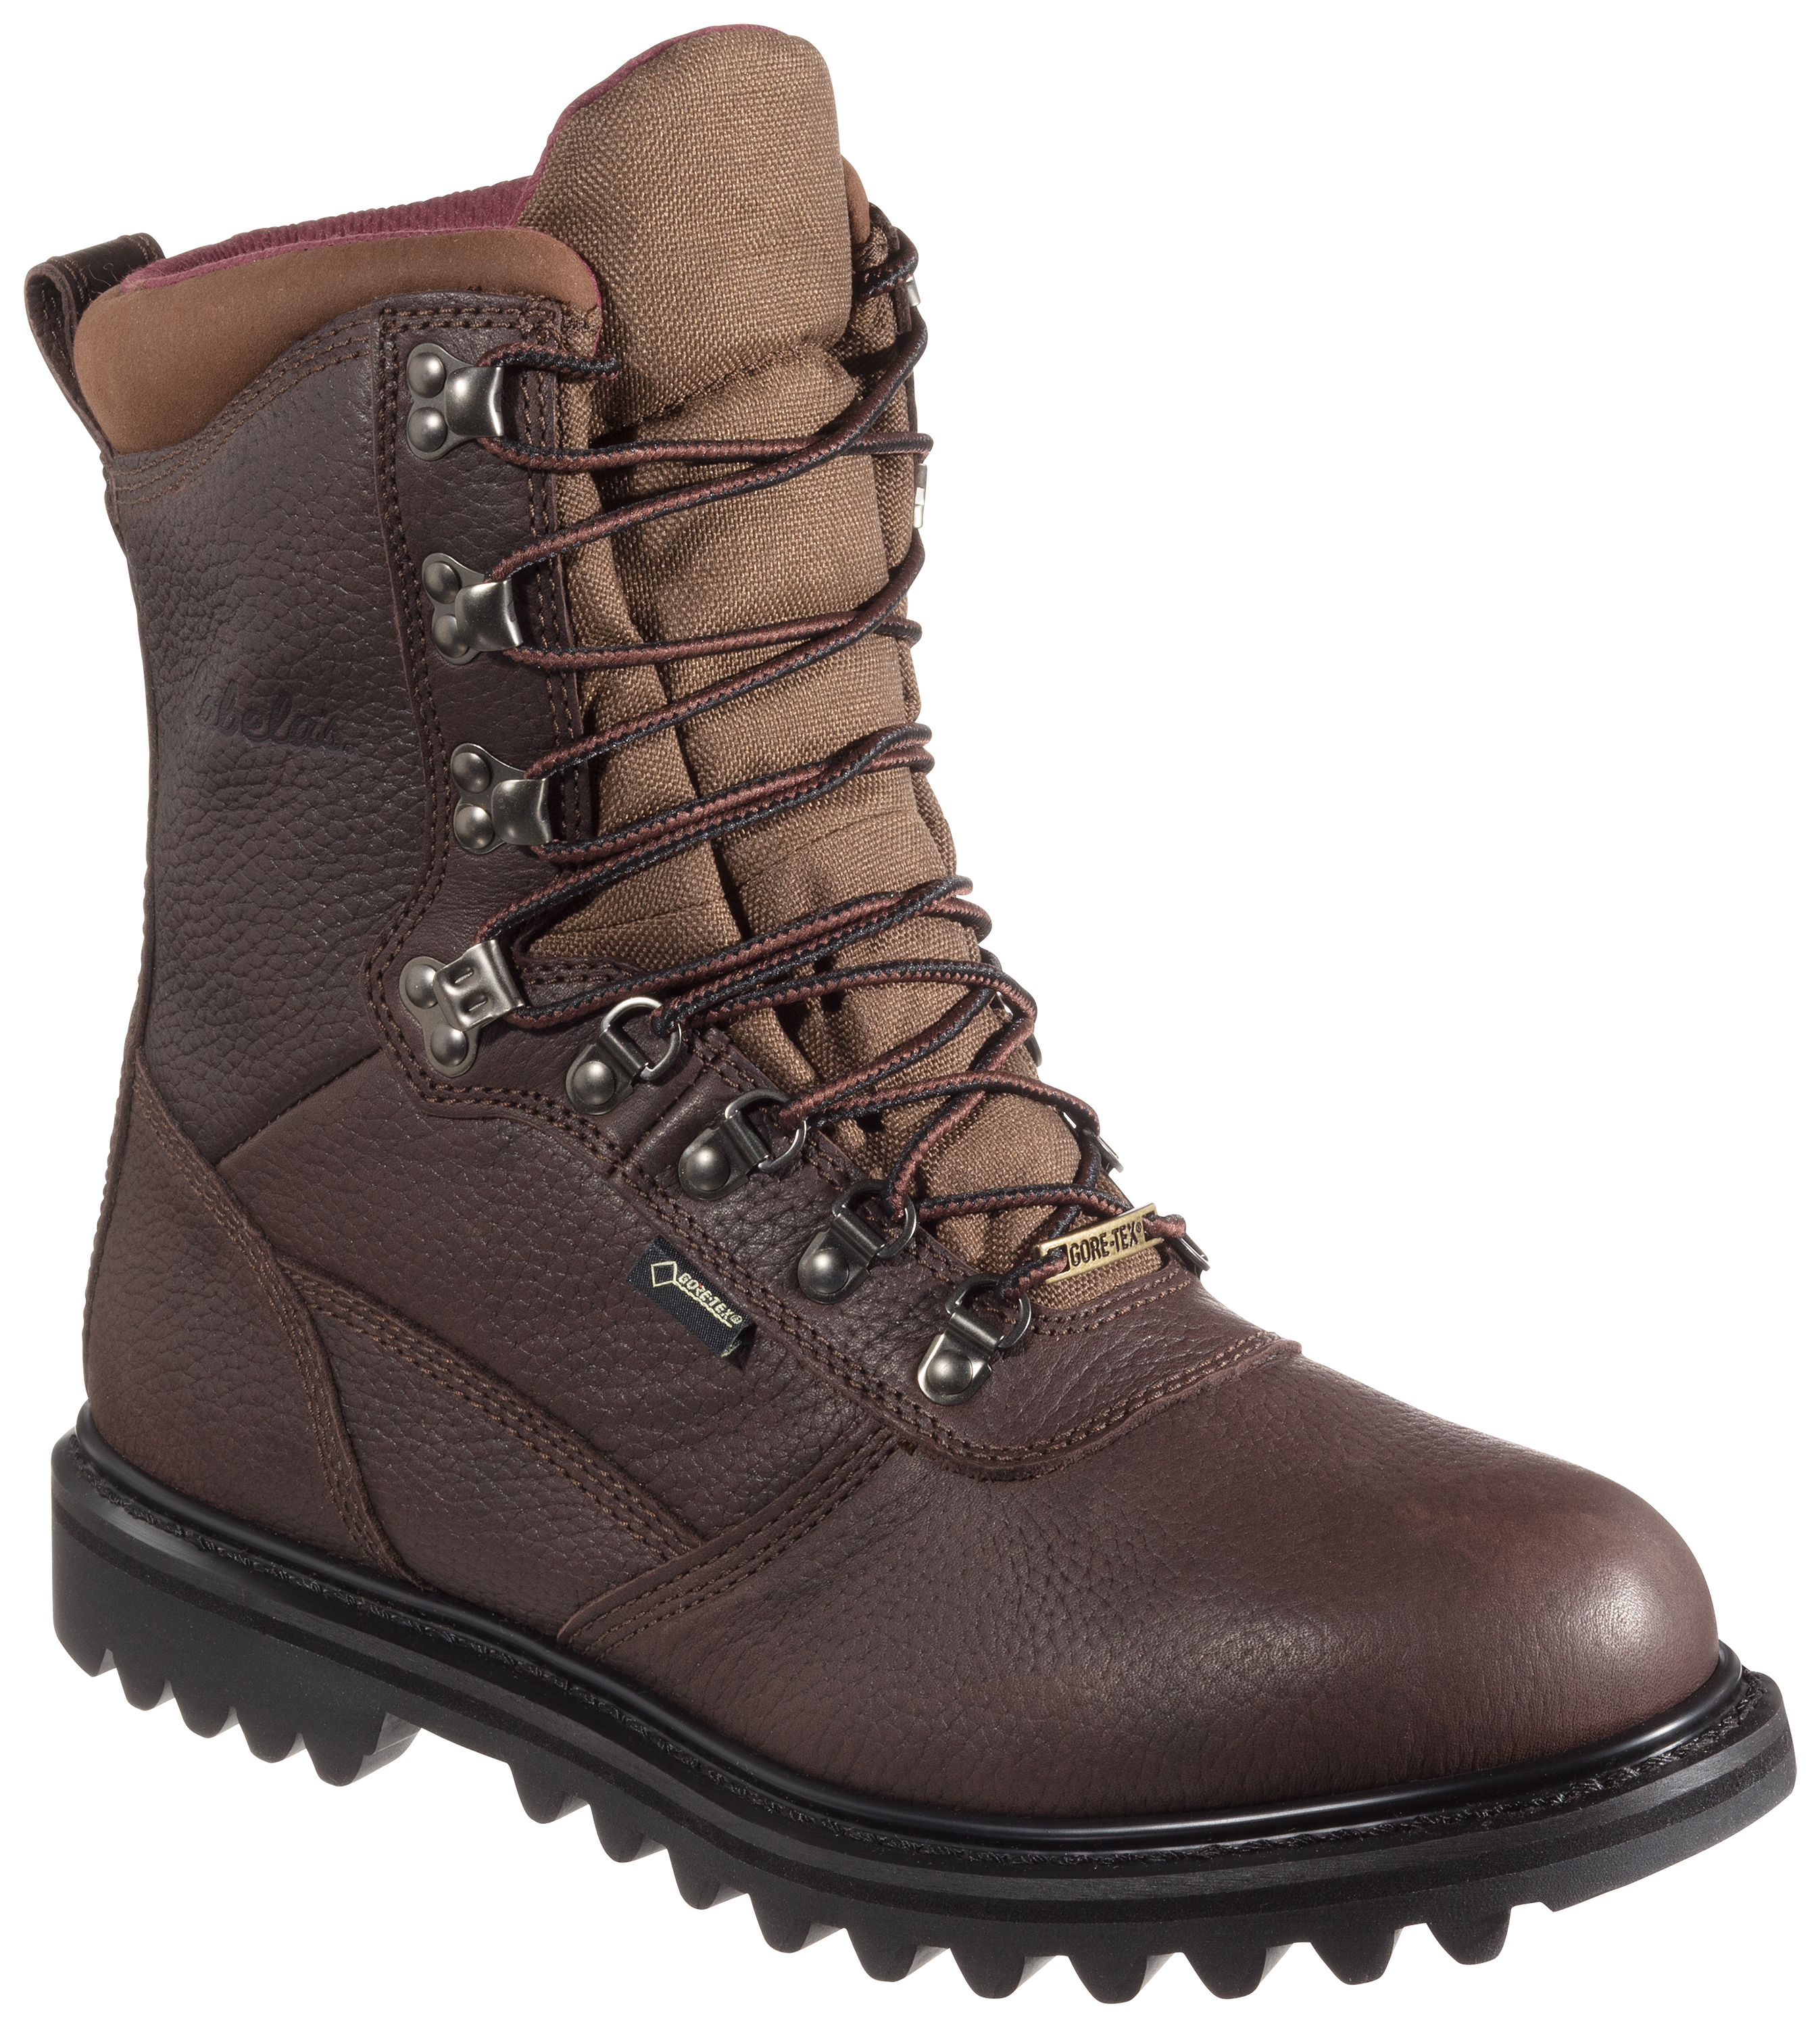 Cabela's Iron Ridge GORE-TEX Insulated Hunting Boots for Men - Brown - 10M